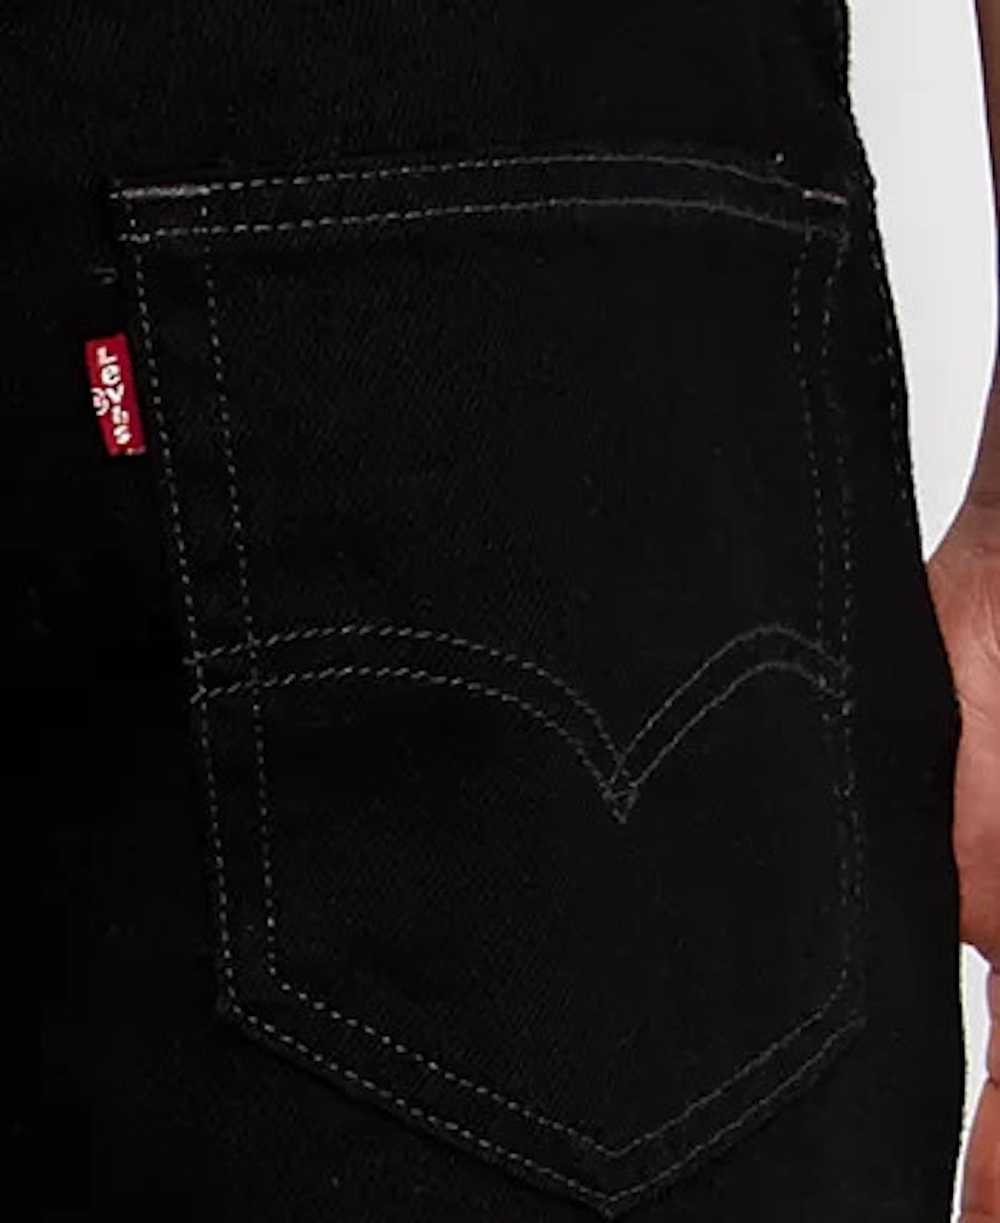 Levi's 550 Relaxed Fit Jeans - image 8